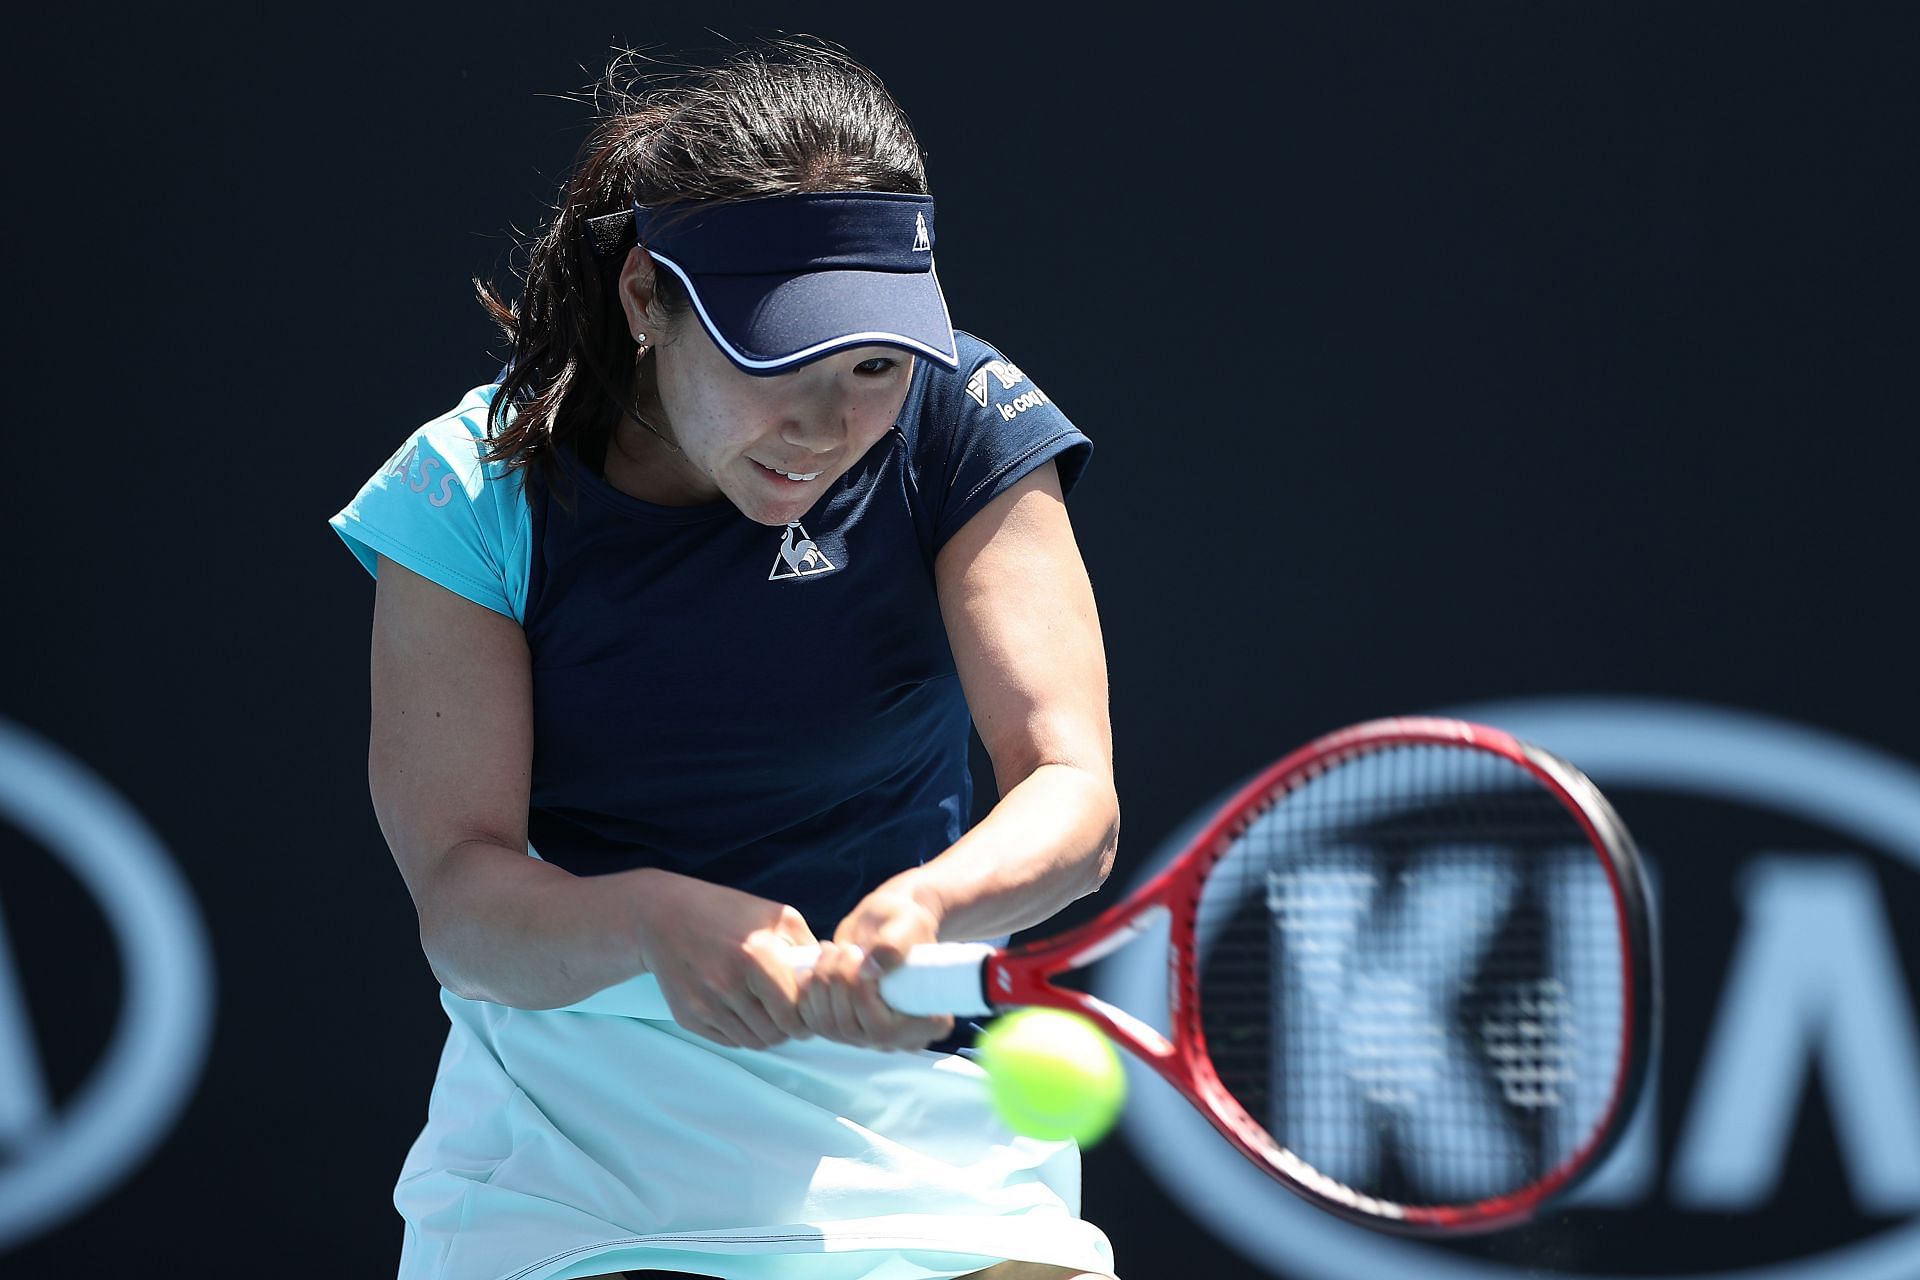 The Chinese government has accused WTA of coercing Peng Shuai